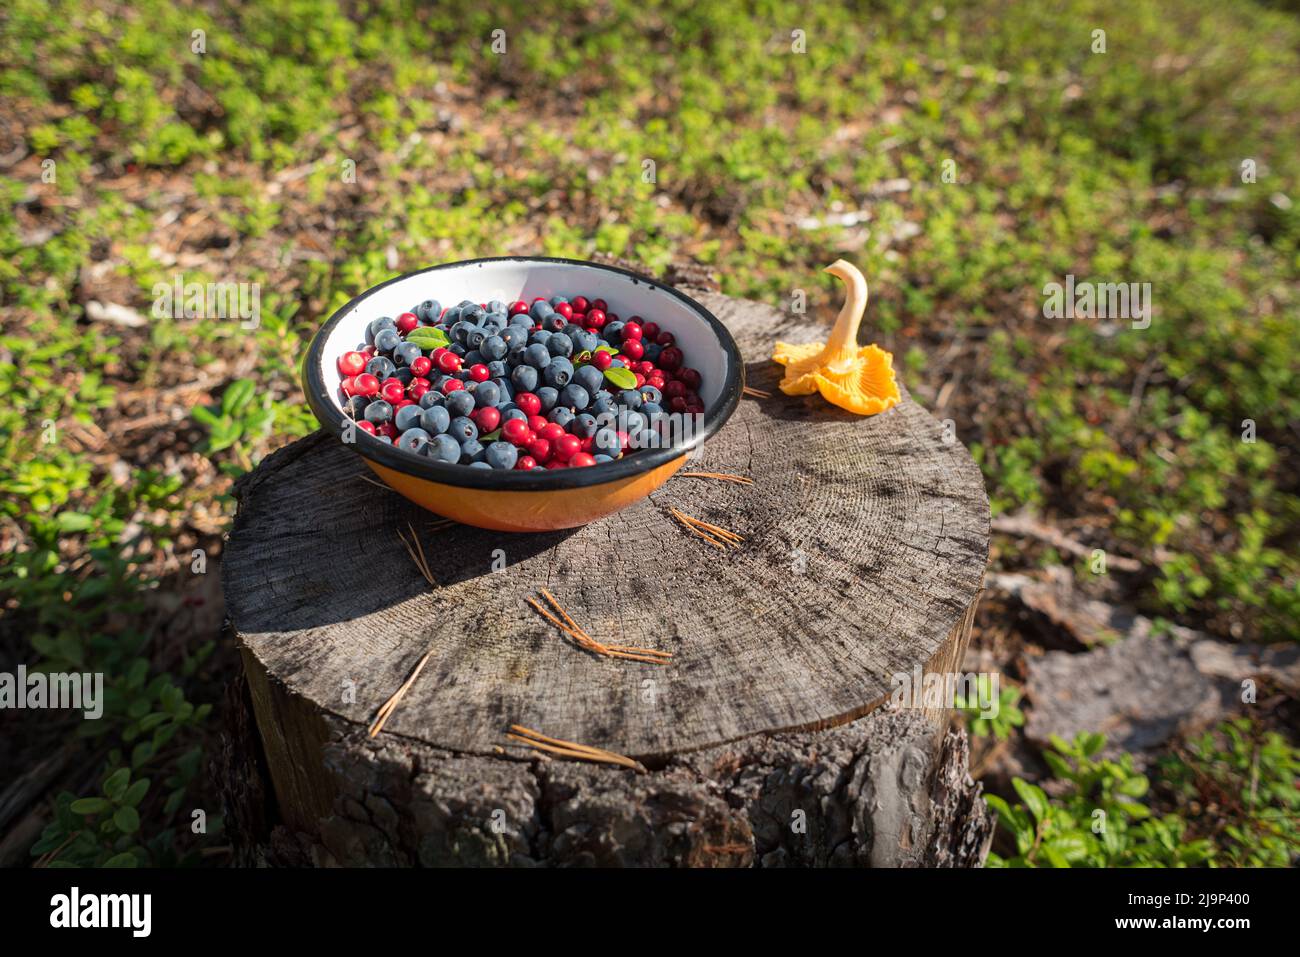 Blueberries and lingonberries in a bowl, a chanterelle mushroom, on the stump. Stock Photo